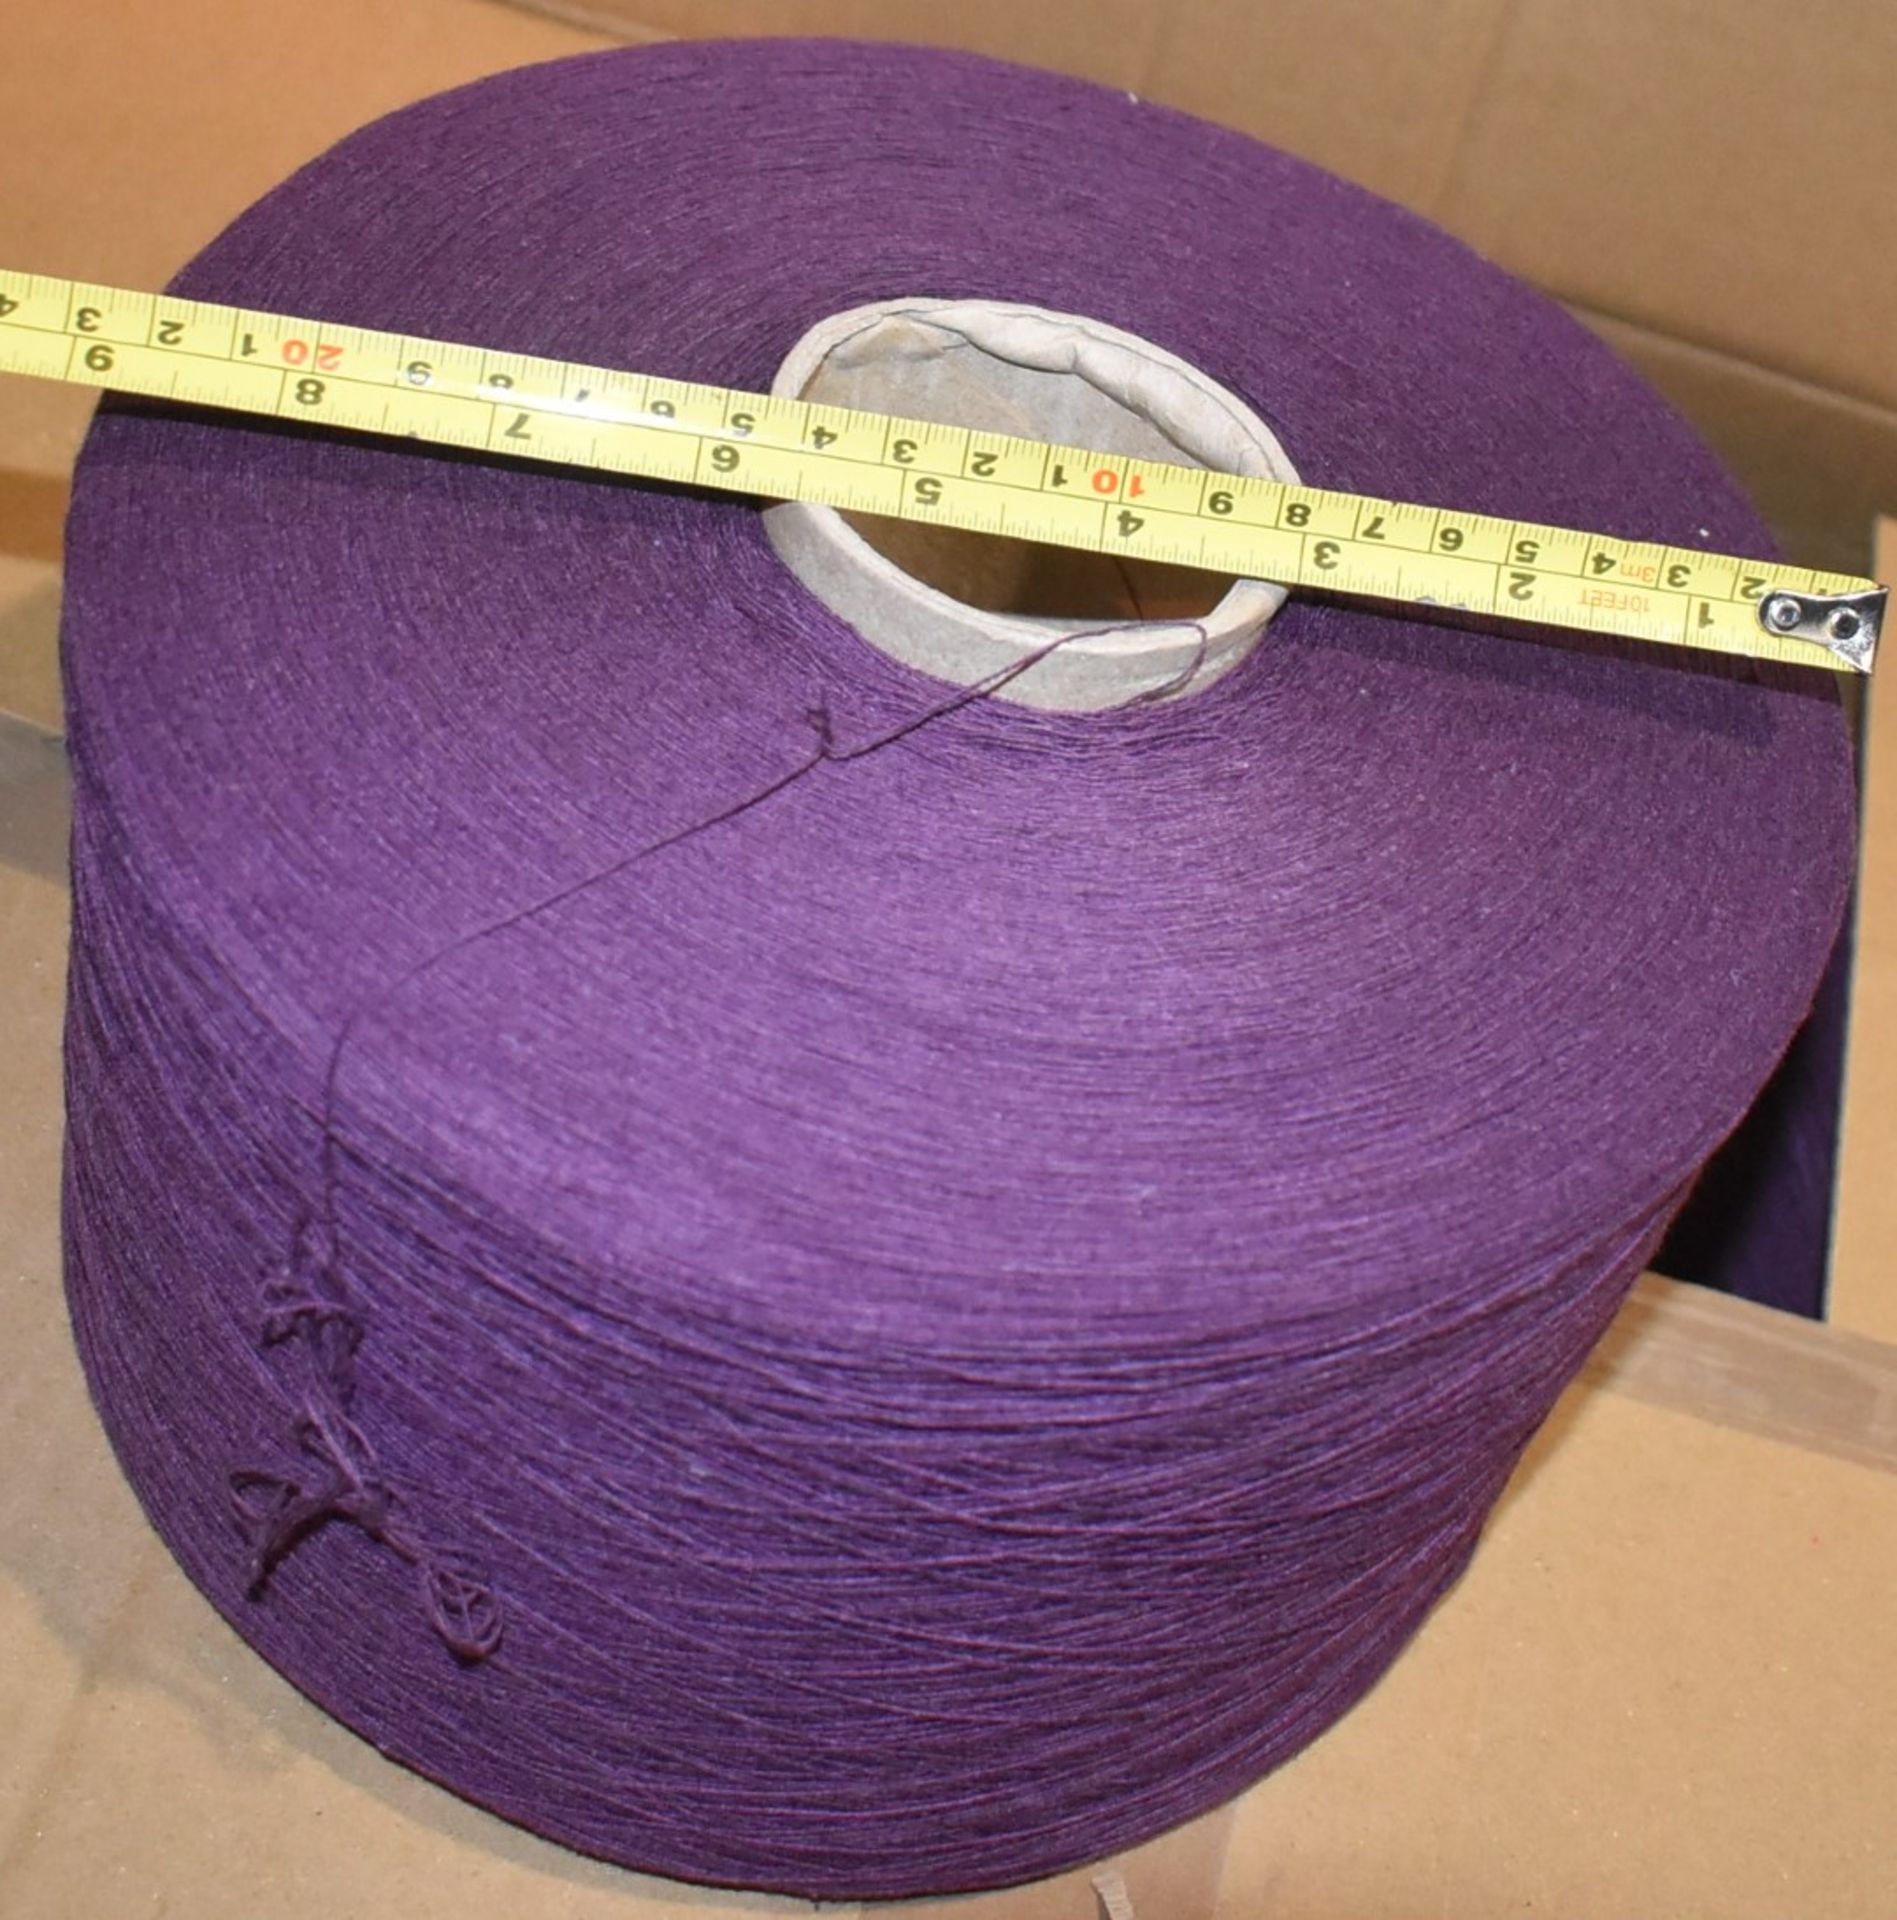 12 x Cones of 1/13 MicroCotton Knitting Yarn - Purple - Approx Weight: 2,300g - New Stock ABL Yarn - Image 13 of 15